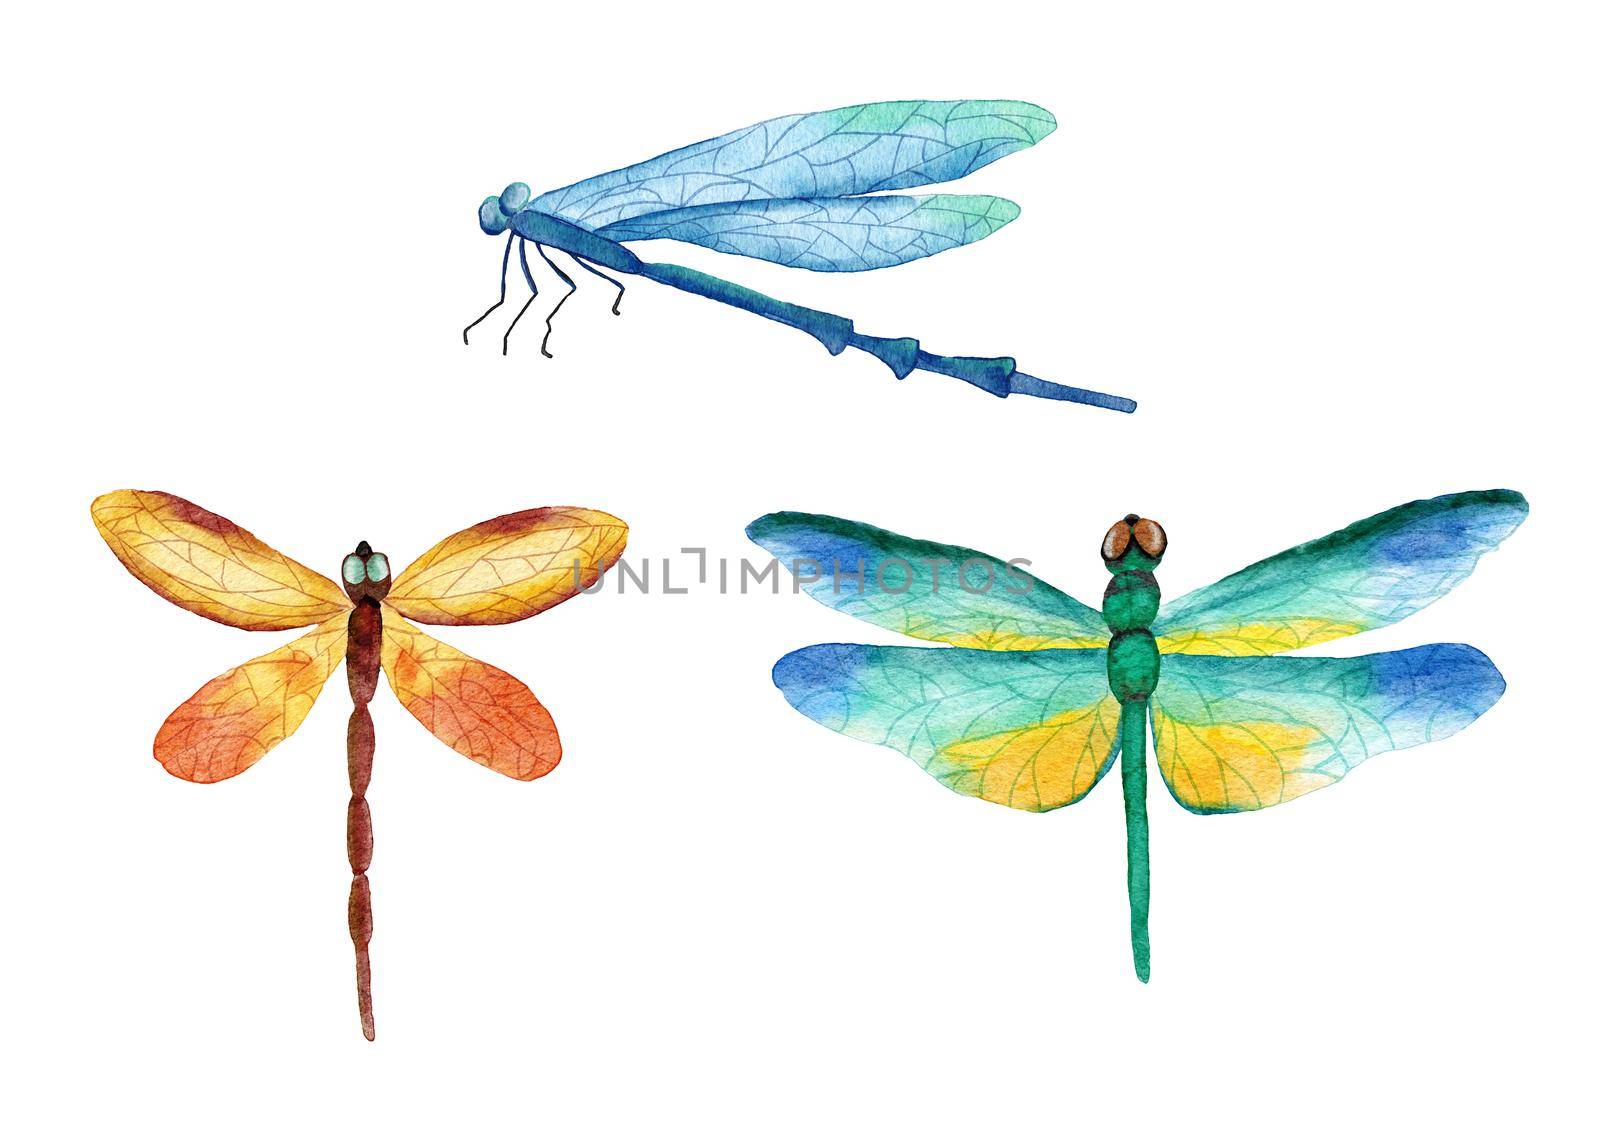 Watercolor hand drawn illustration of three bright vivid dragonfly insects. Natural forest dragonflies in blue yellow green orange colors. Wild wildlife nature ecology concept by Lagmar